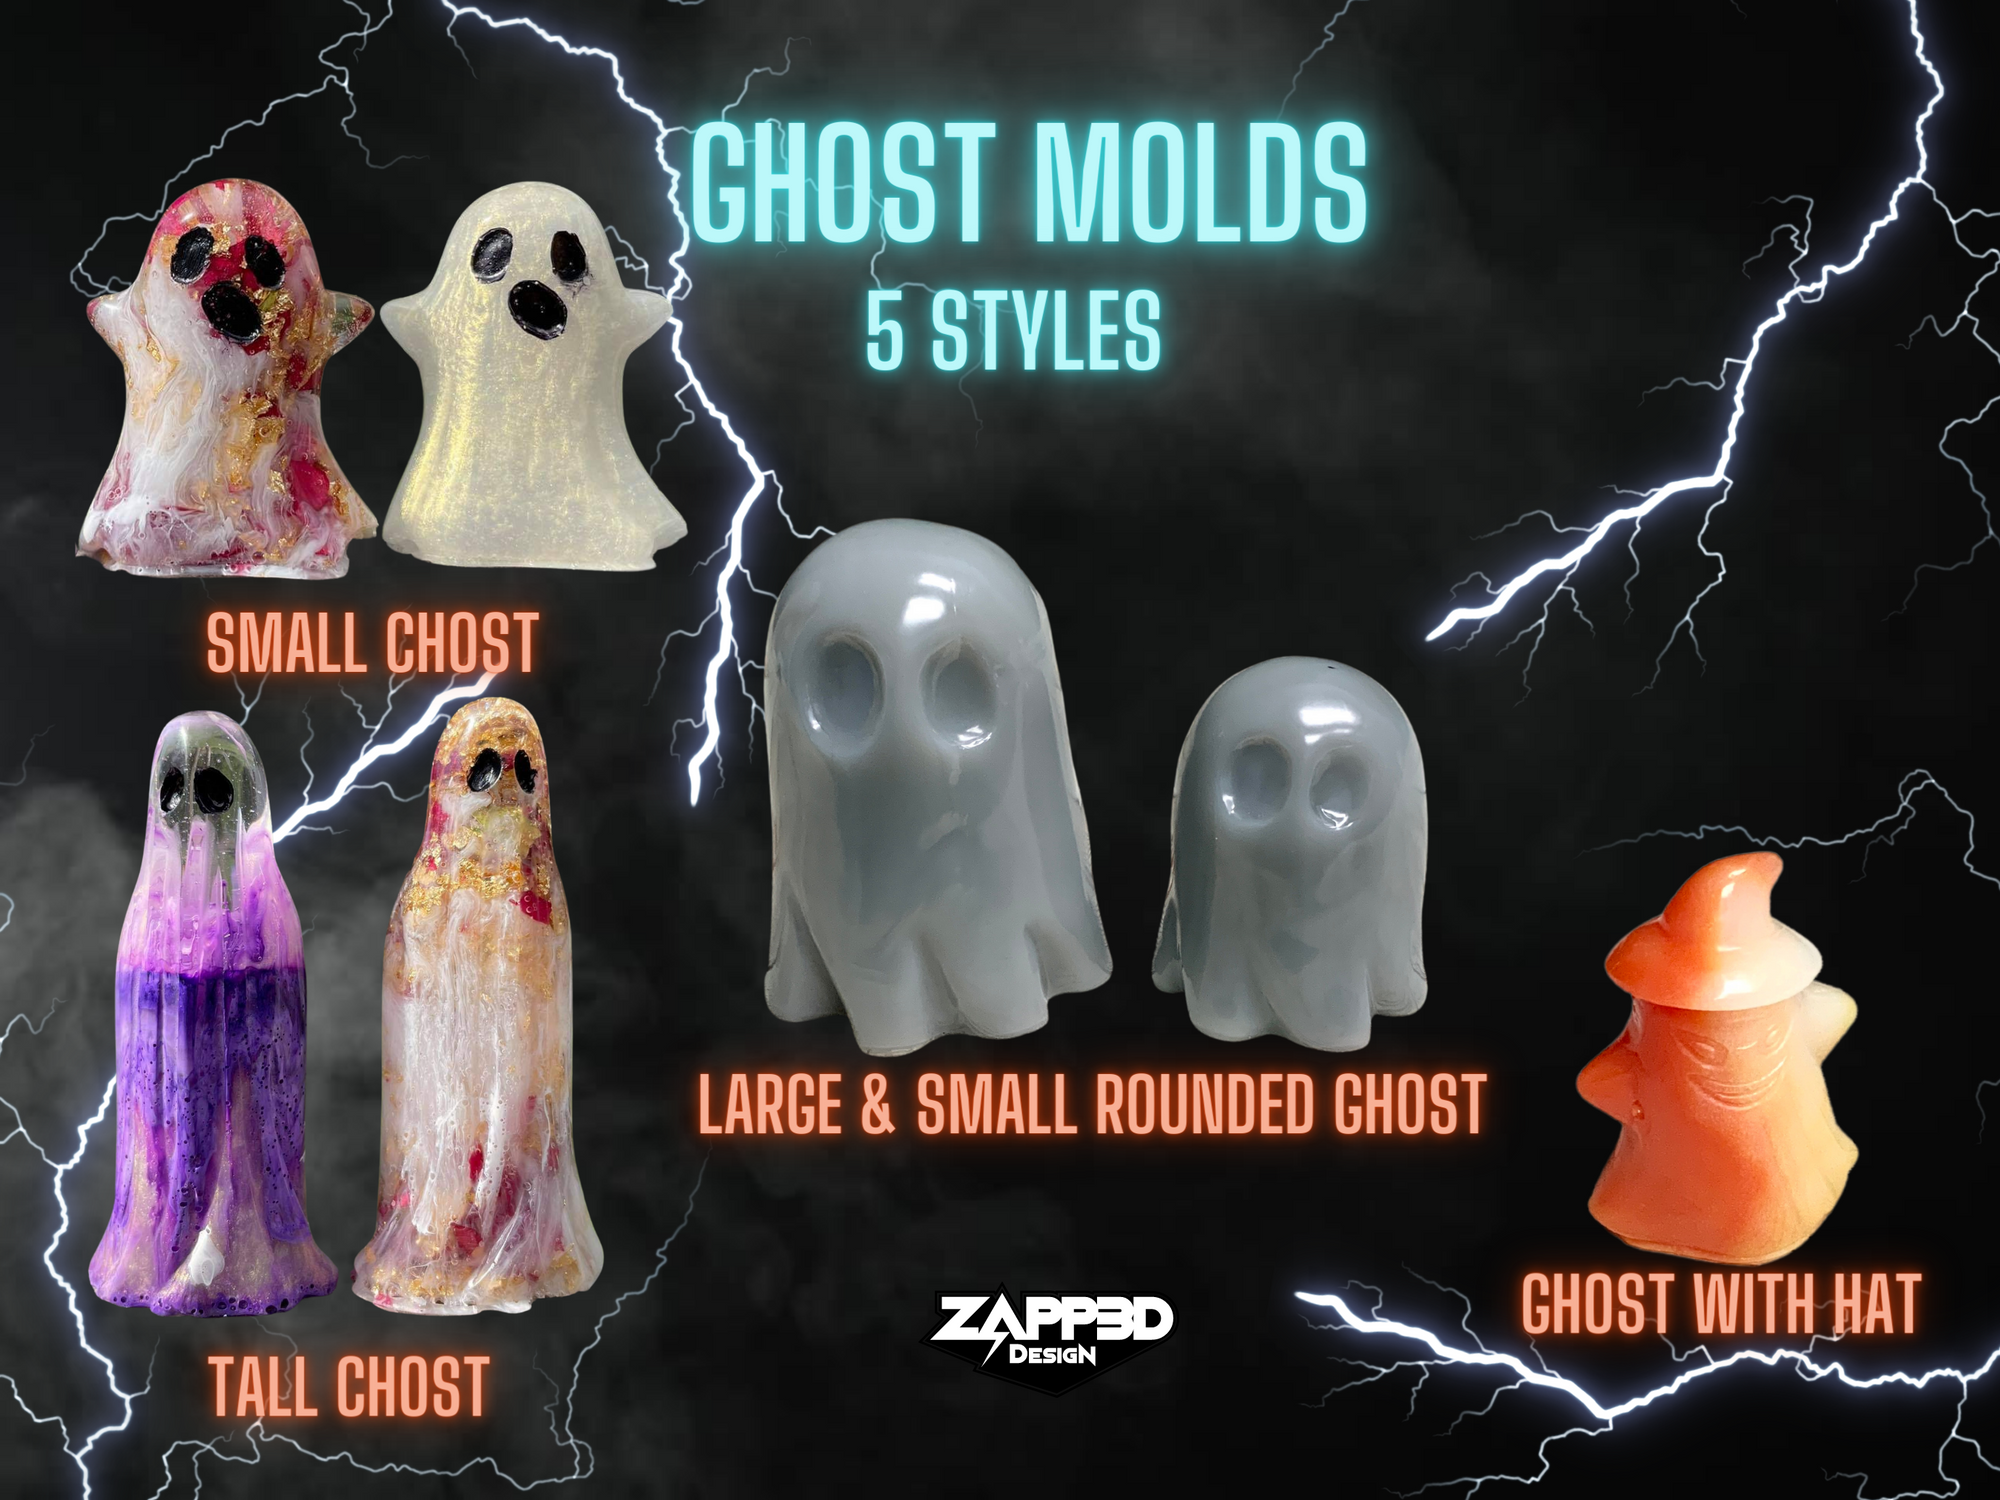 Ghost Molds for Resin | 5 Styles | Ghost 3D Molds, Halloween Mold, Spooky Mold, 3D Molds, Ghost Molds